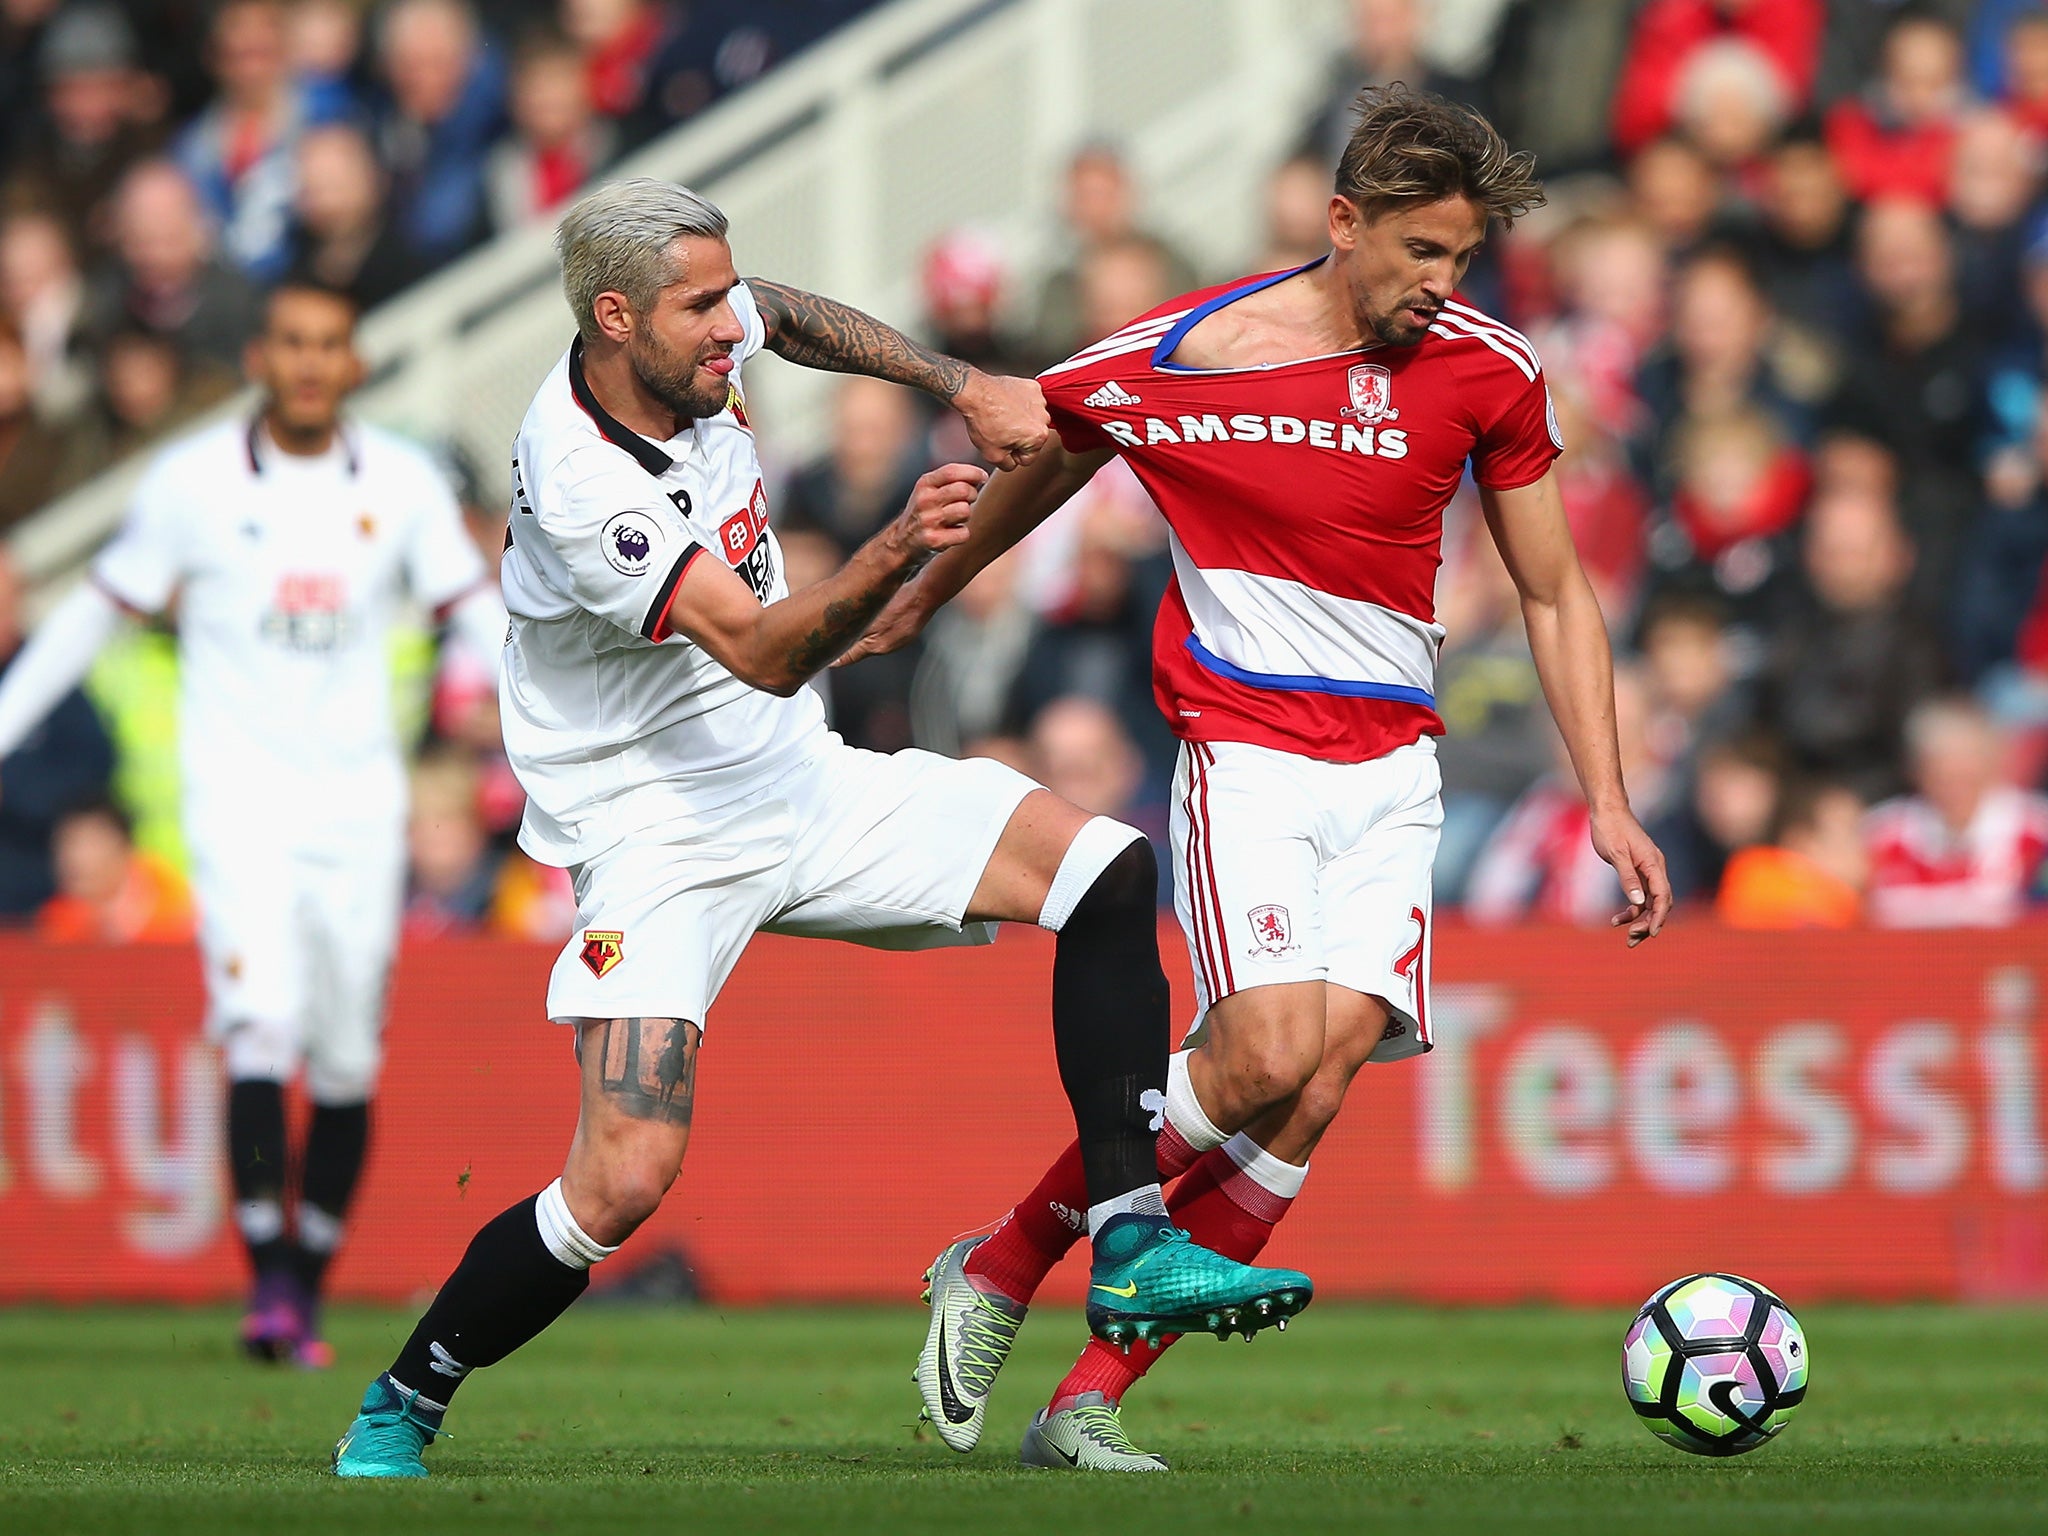 Behrami and Ramirez battle for the ball at the Riverside